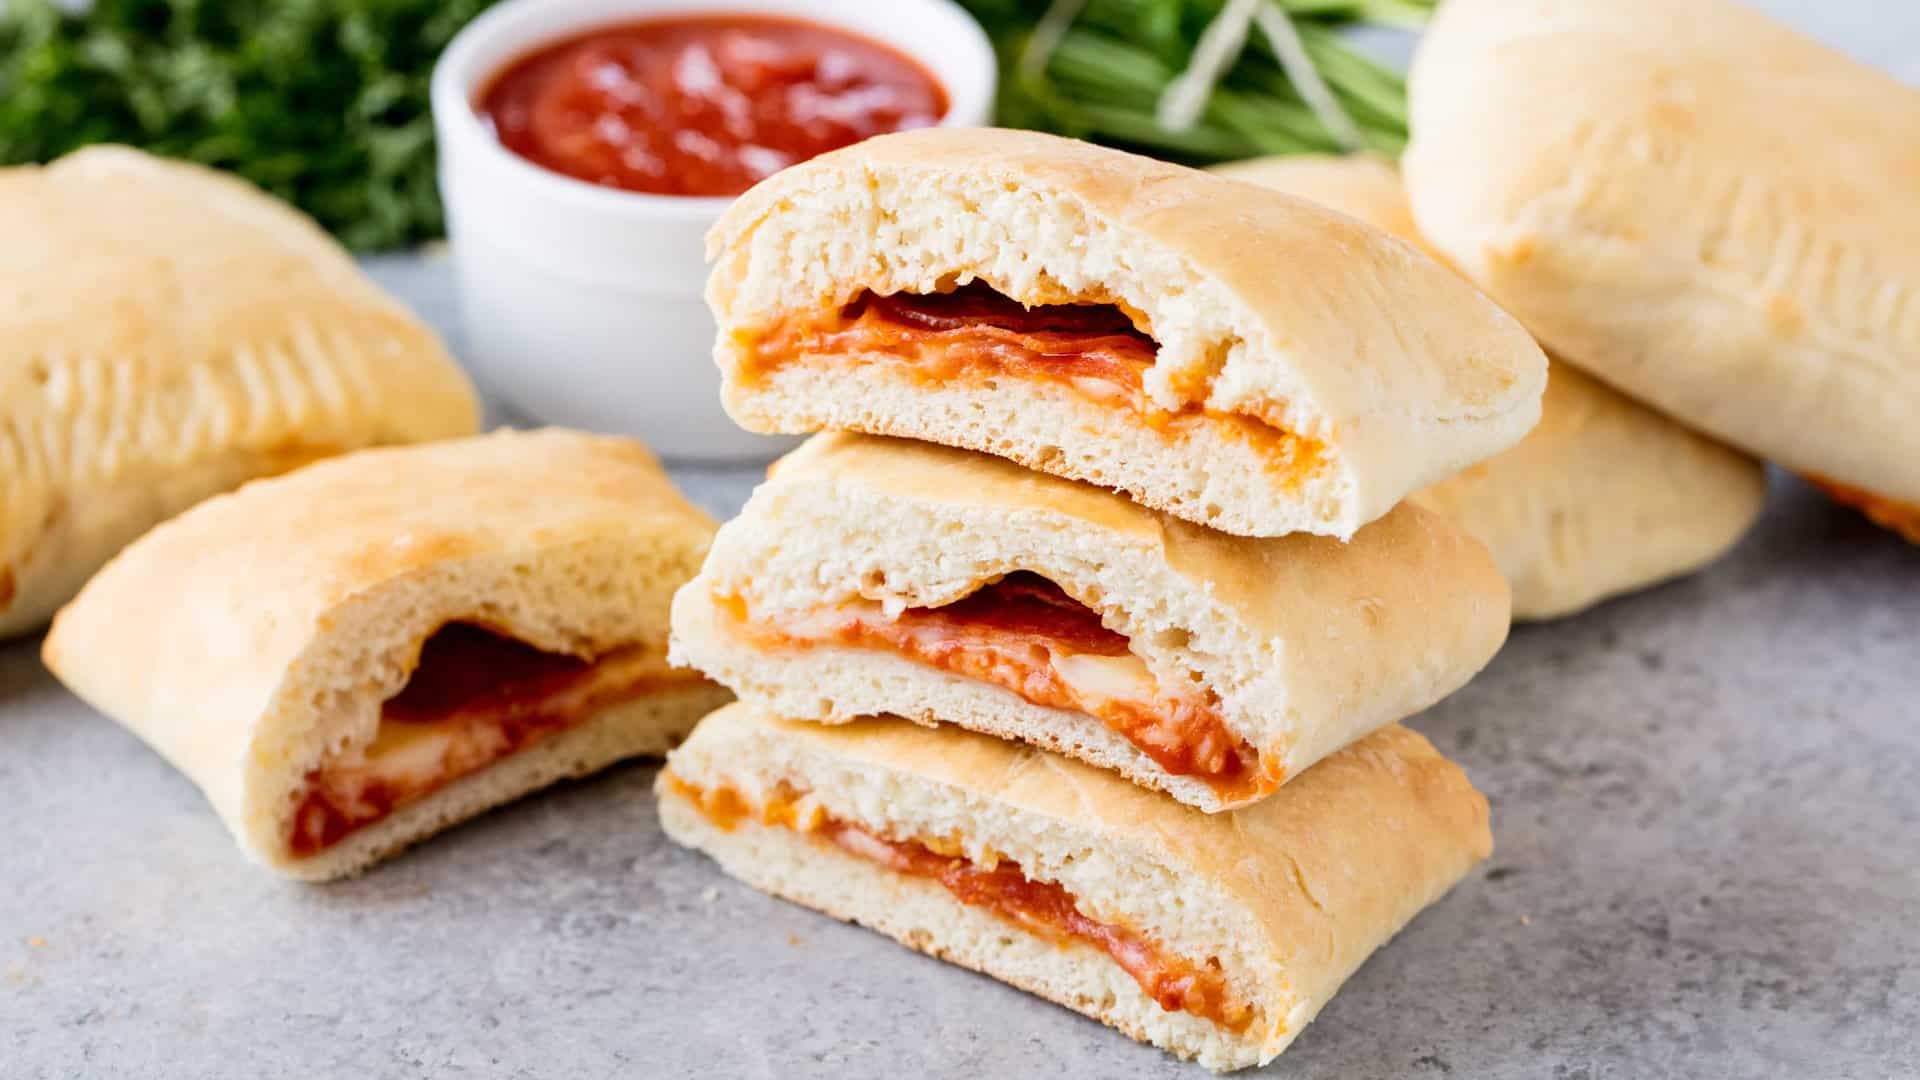 Homemade Hot Pockets are an easy homemade freezable lunch idea. They are perfect for an on-the-go meal, as well as to put in lunch boxes. The flavor combinations are endless!